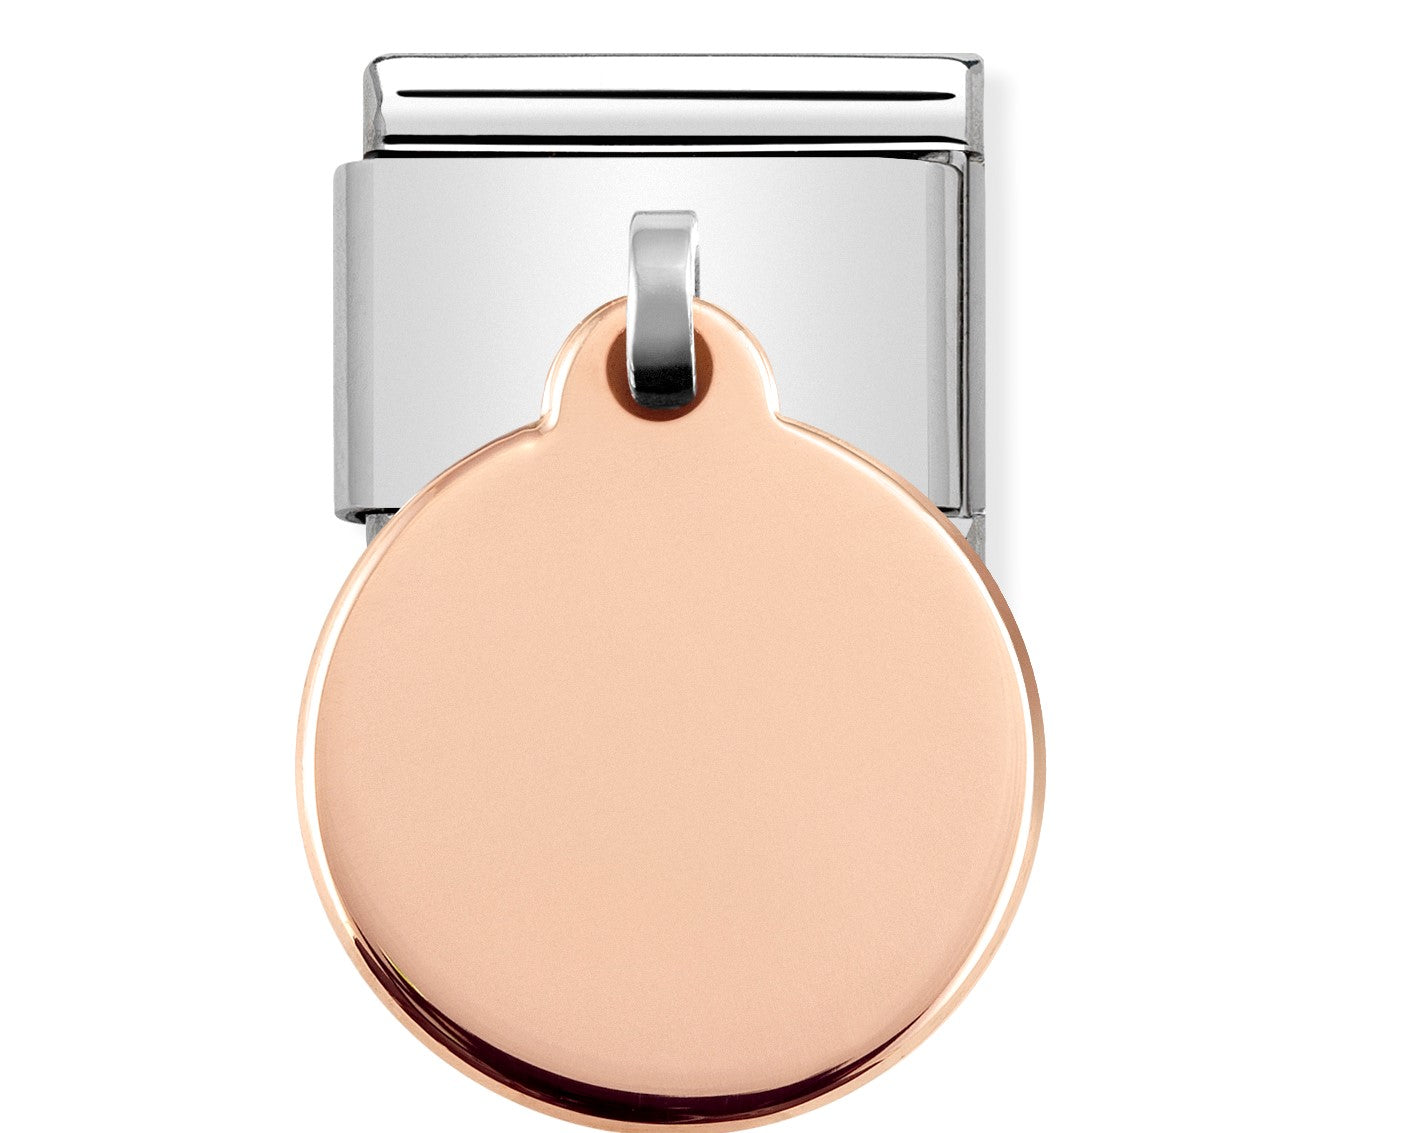 Nomination Engravable Classic Link with Circle Charm in Rose Gold Tone